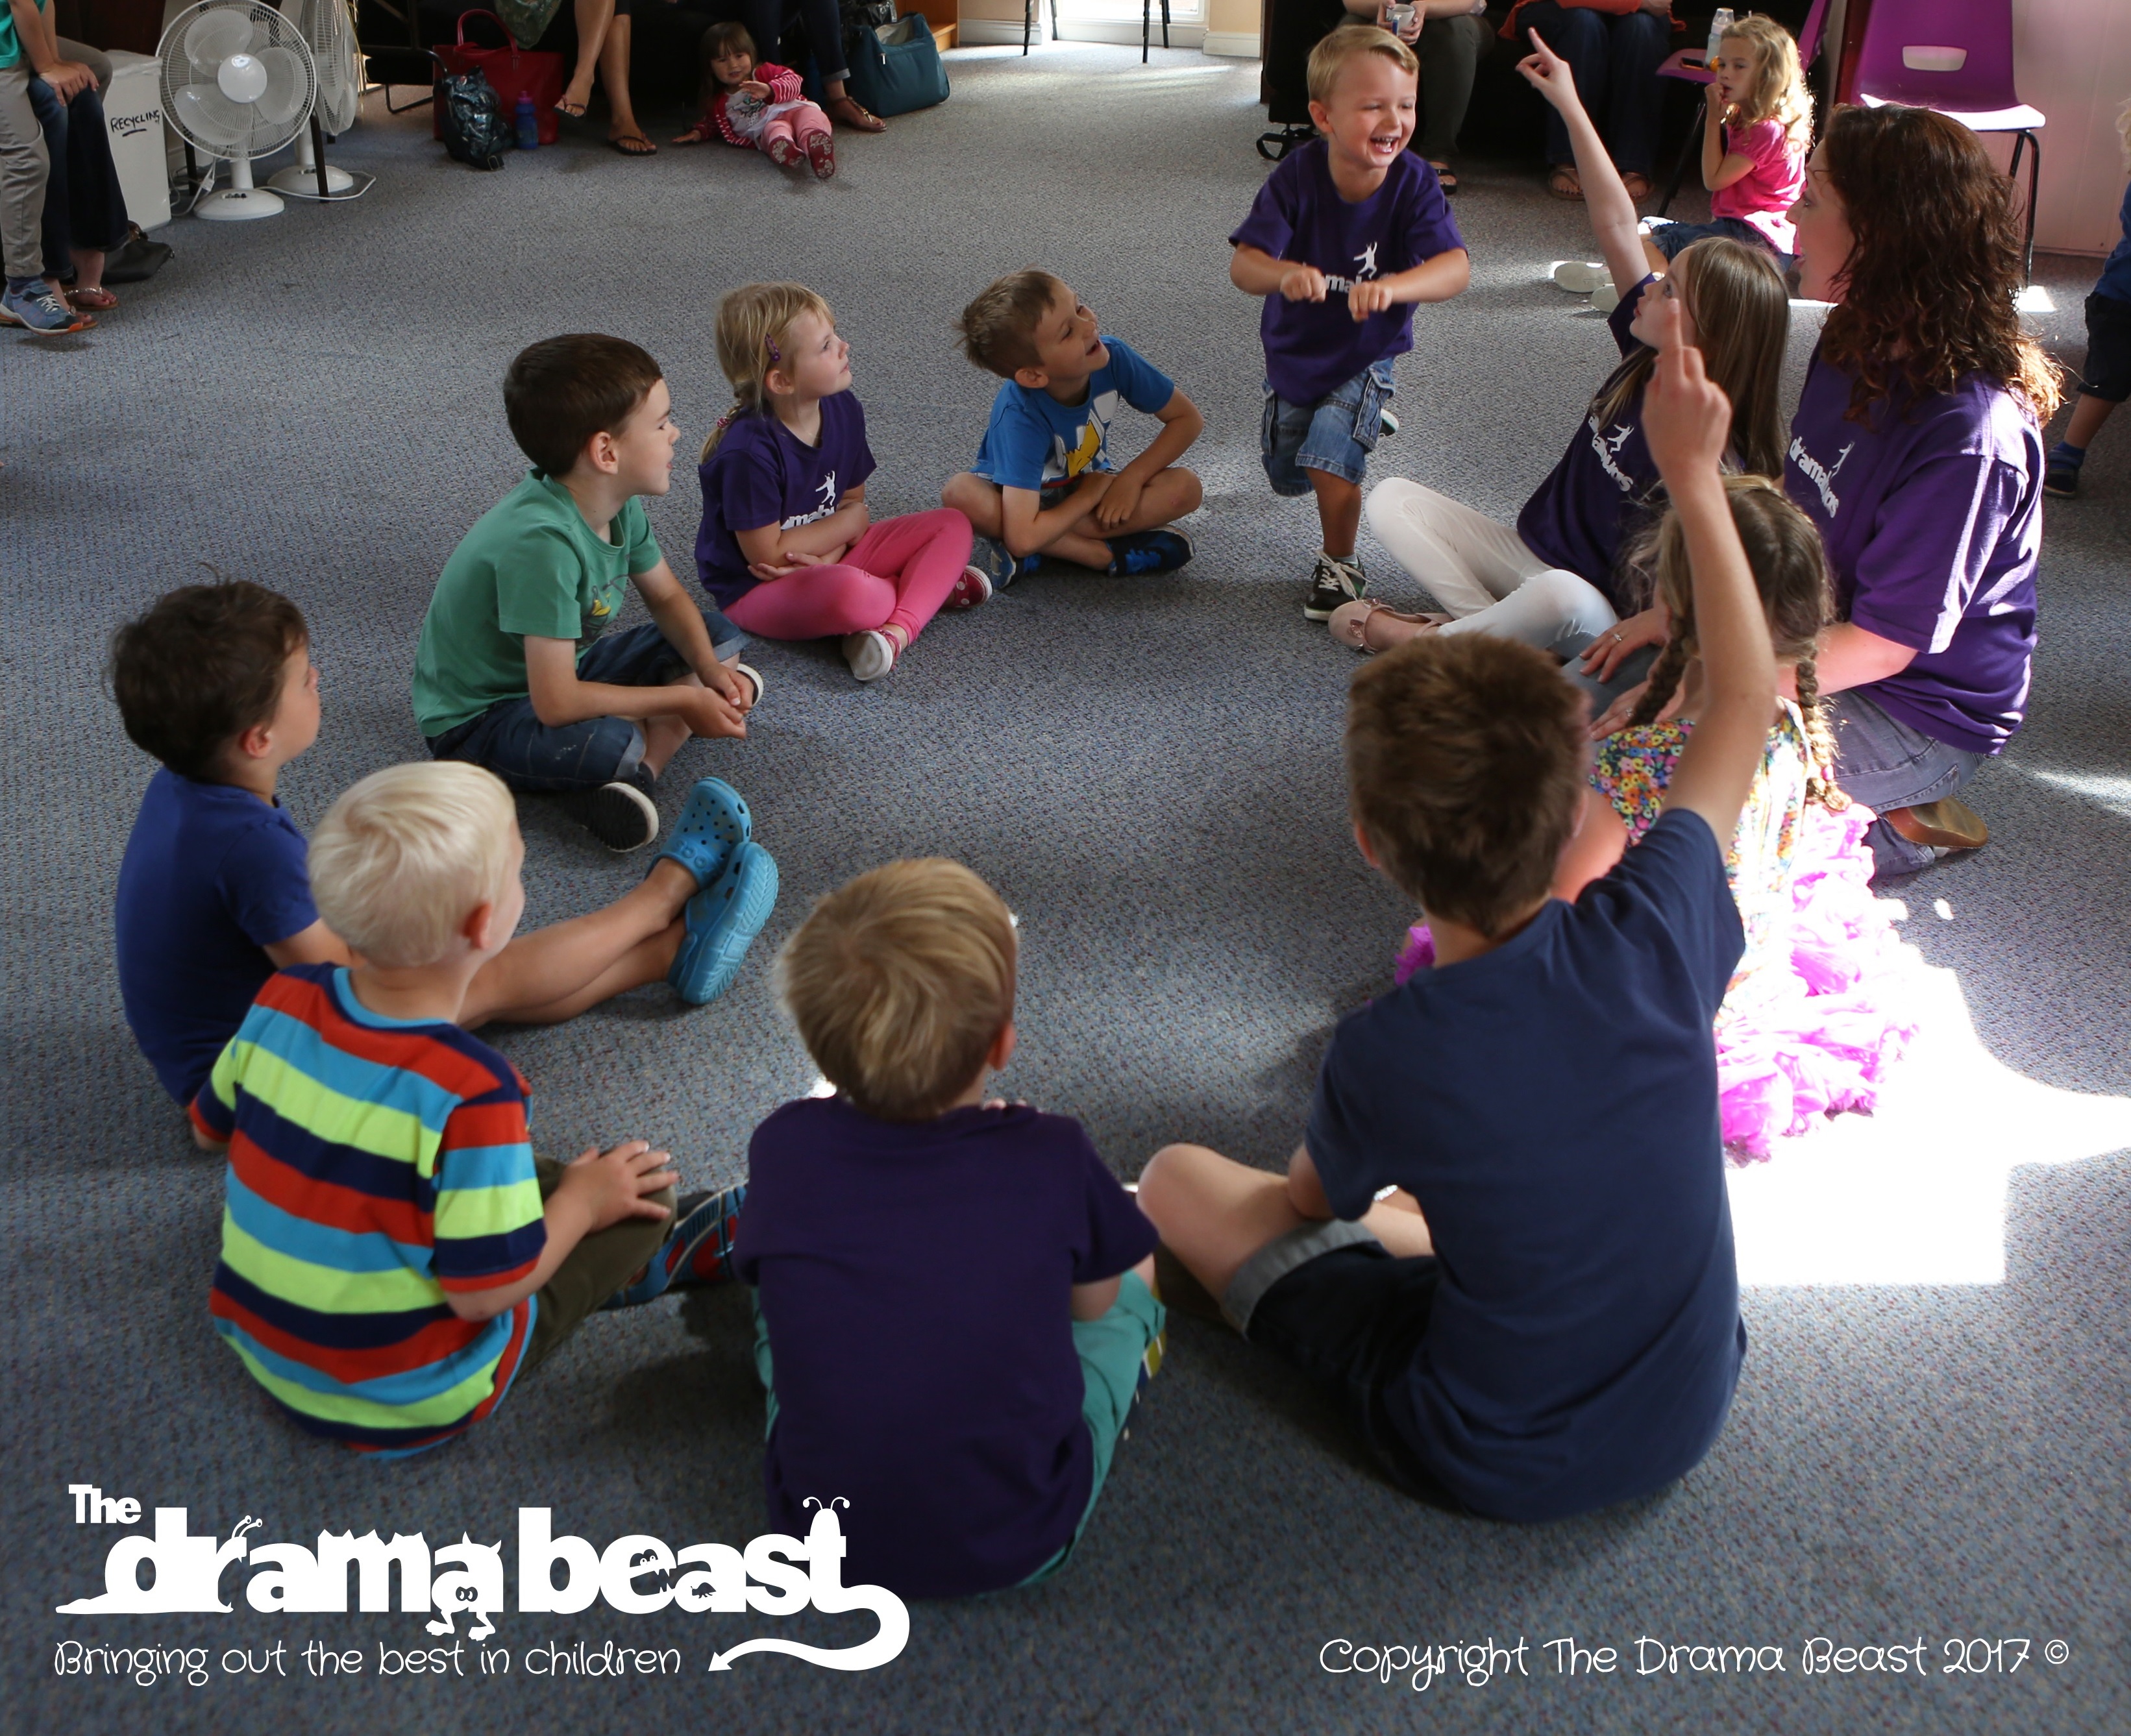 Drama for kids can substantially improve confidence and sociability in kids